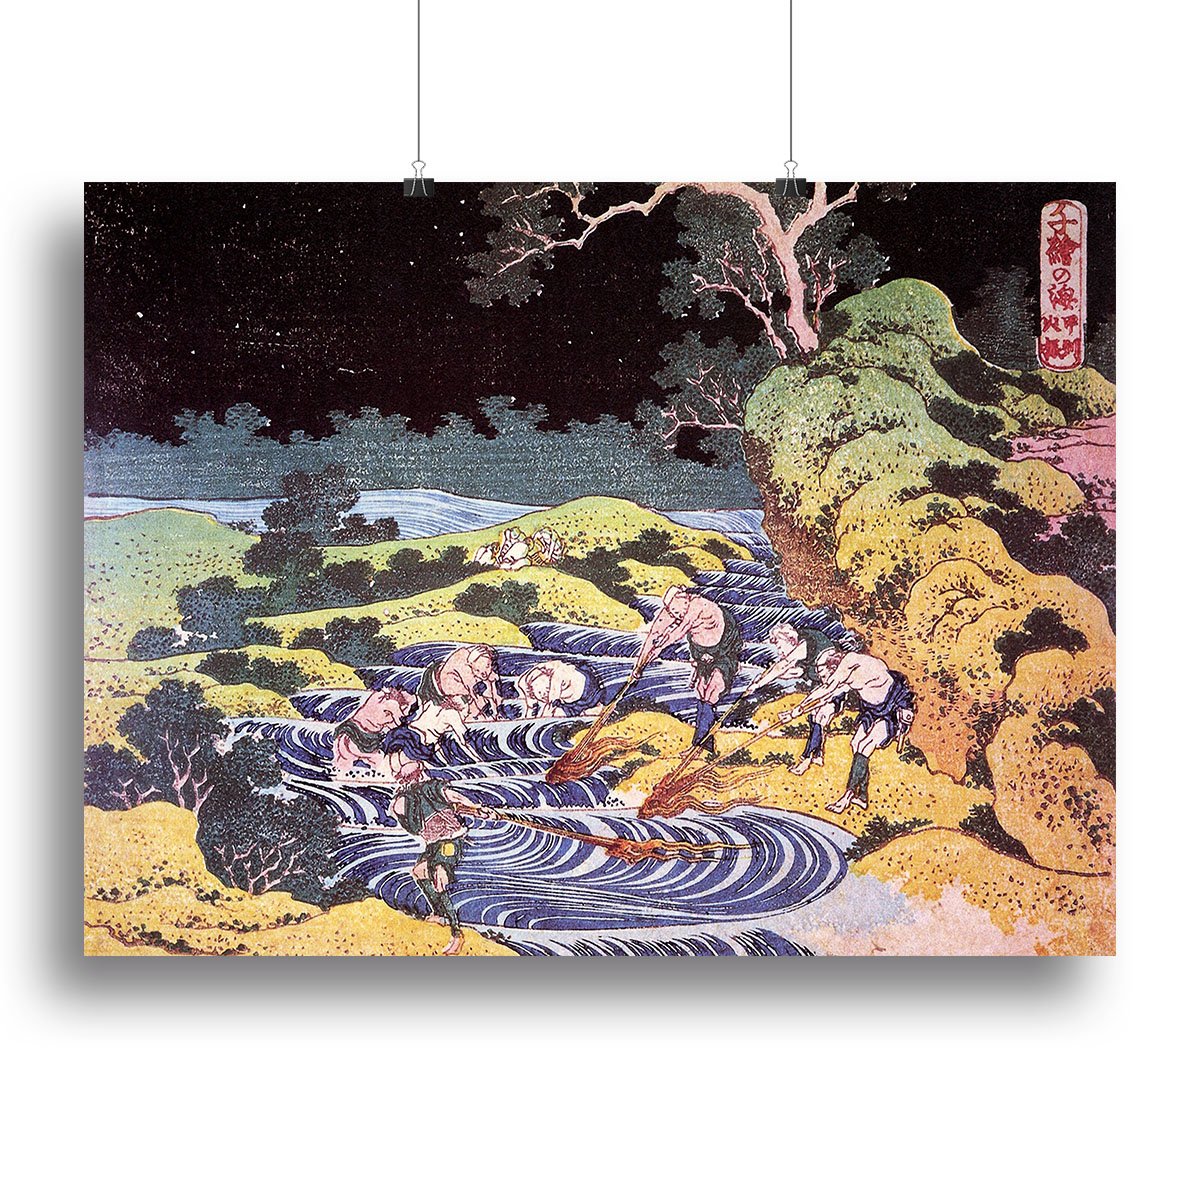 Ocean landscape by Hokusai Canvas Print or Poster